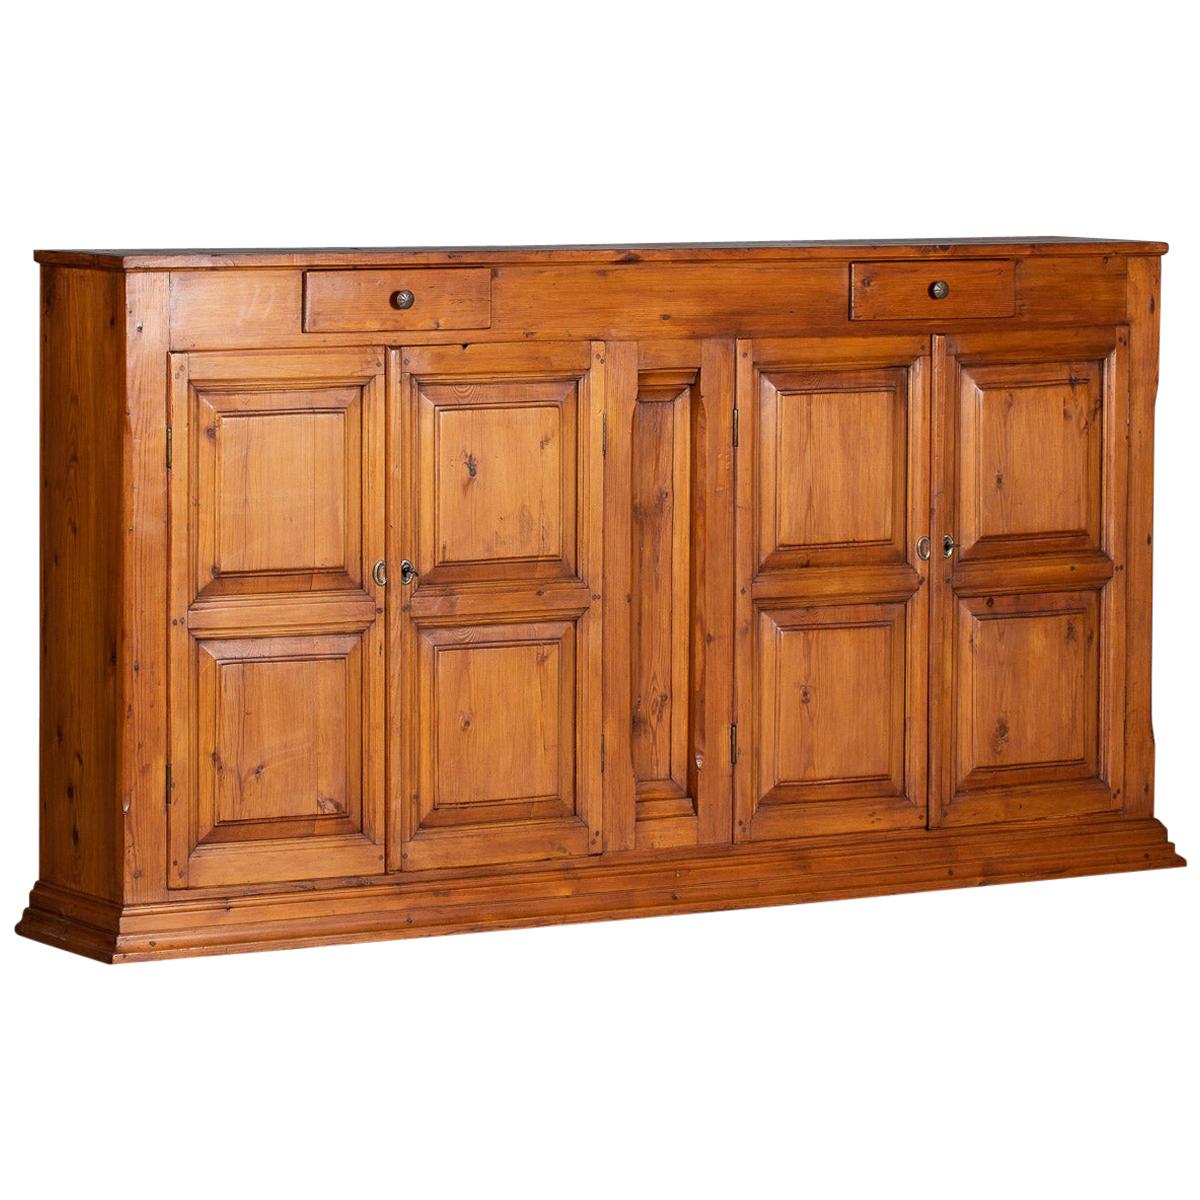 Tall Solid Pine Vintage French Buffet Credenza Cabinet, circa 1930 For Sale